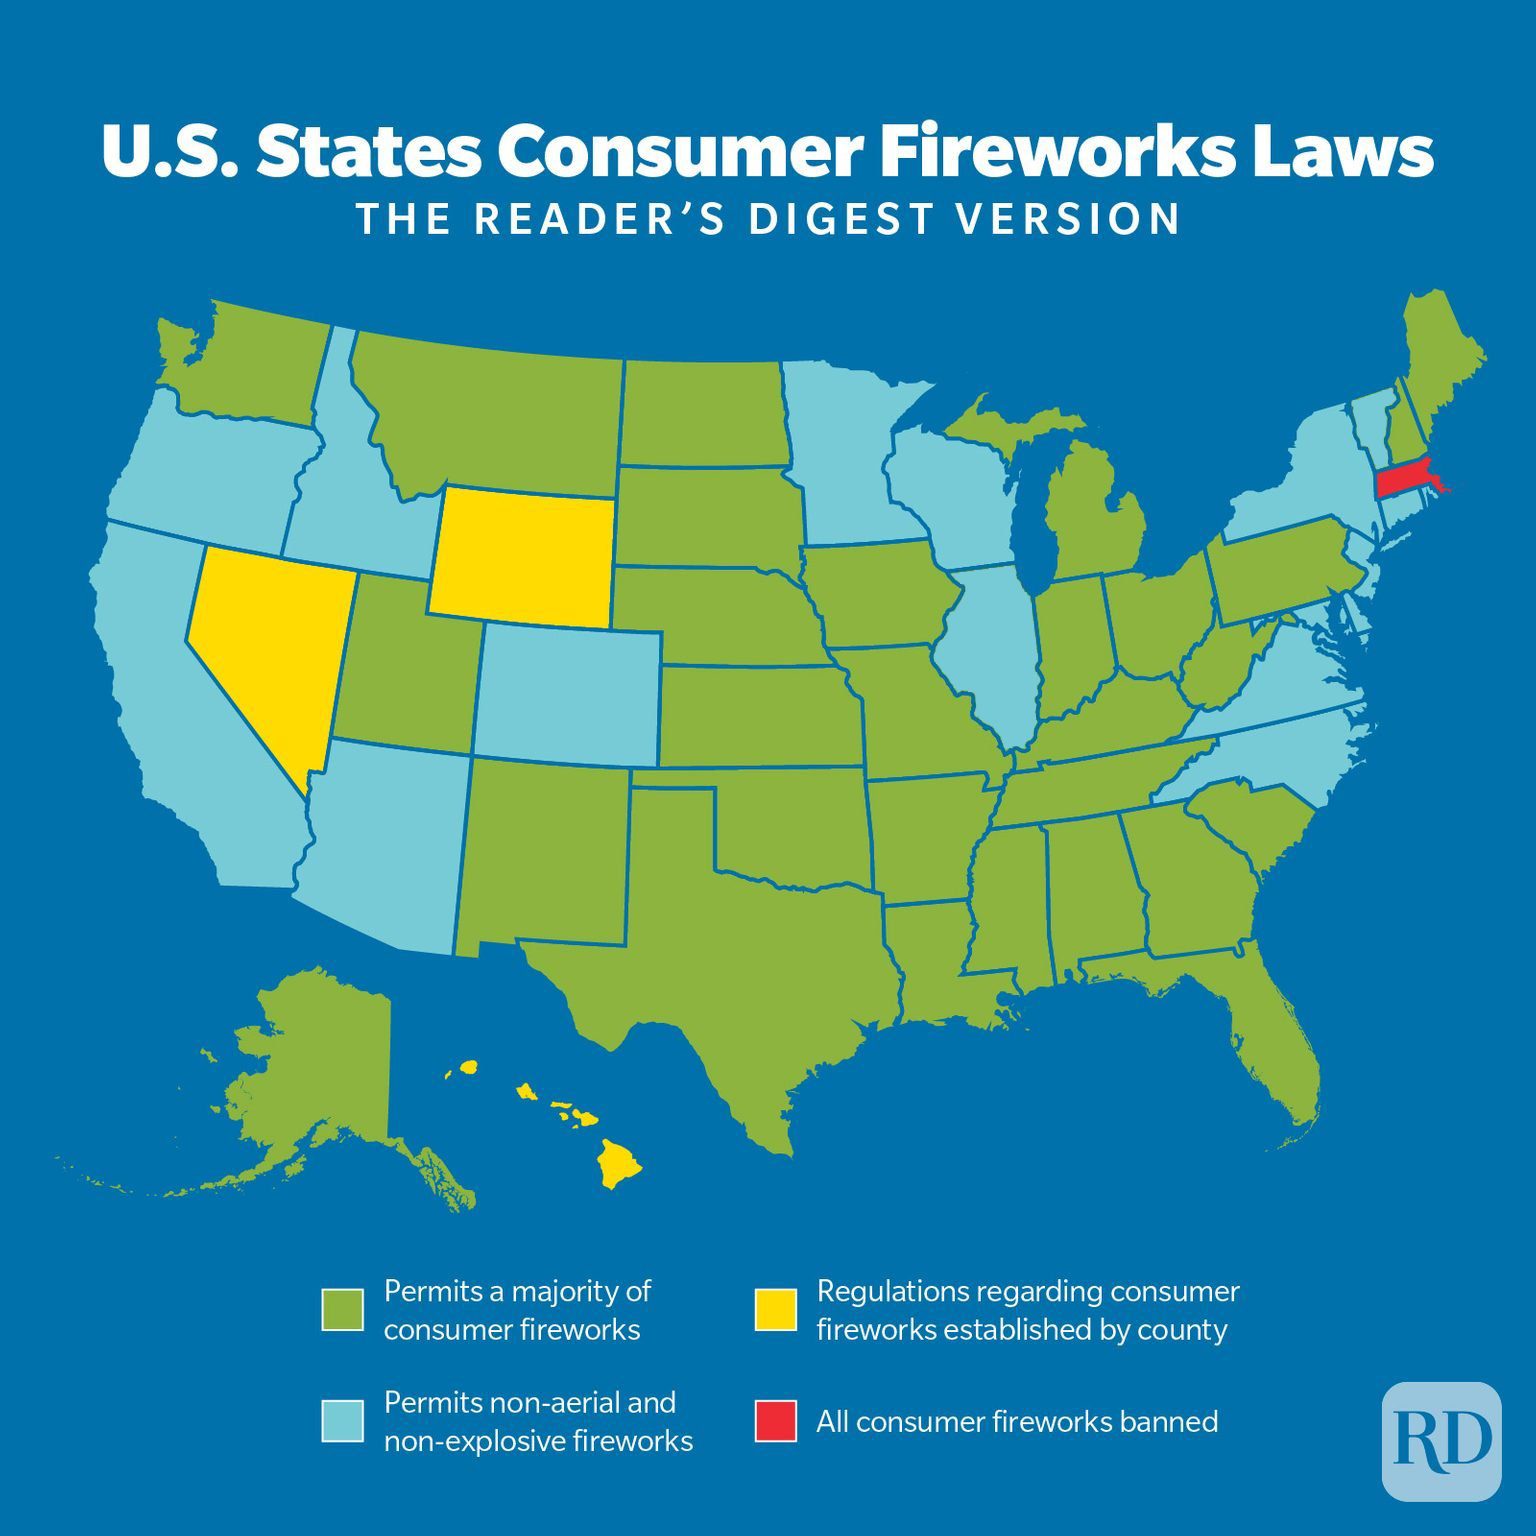 Are fireworks legal in the DMV? Here are laws for DC, Maryland, Virginia.